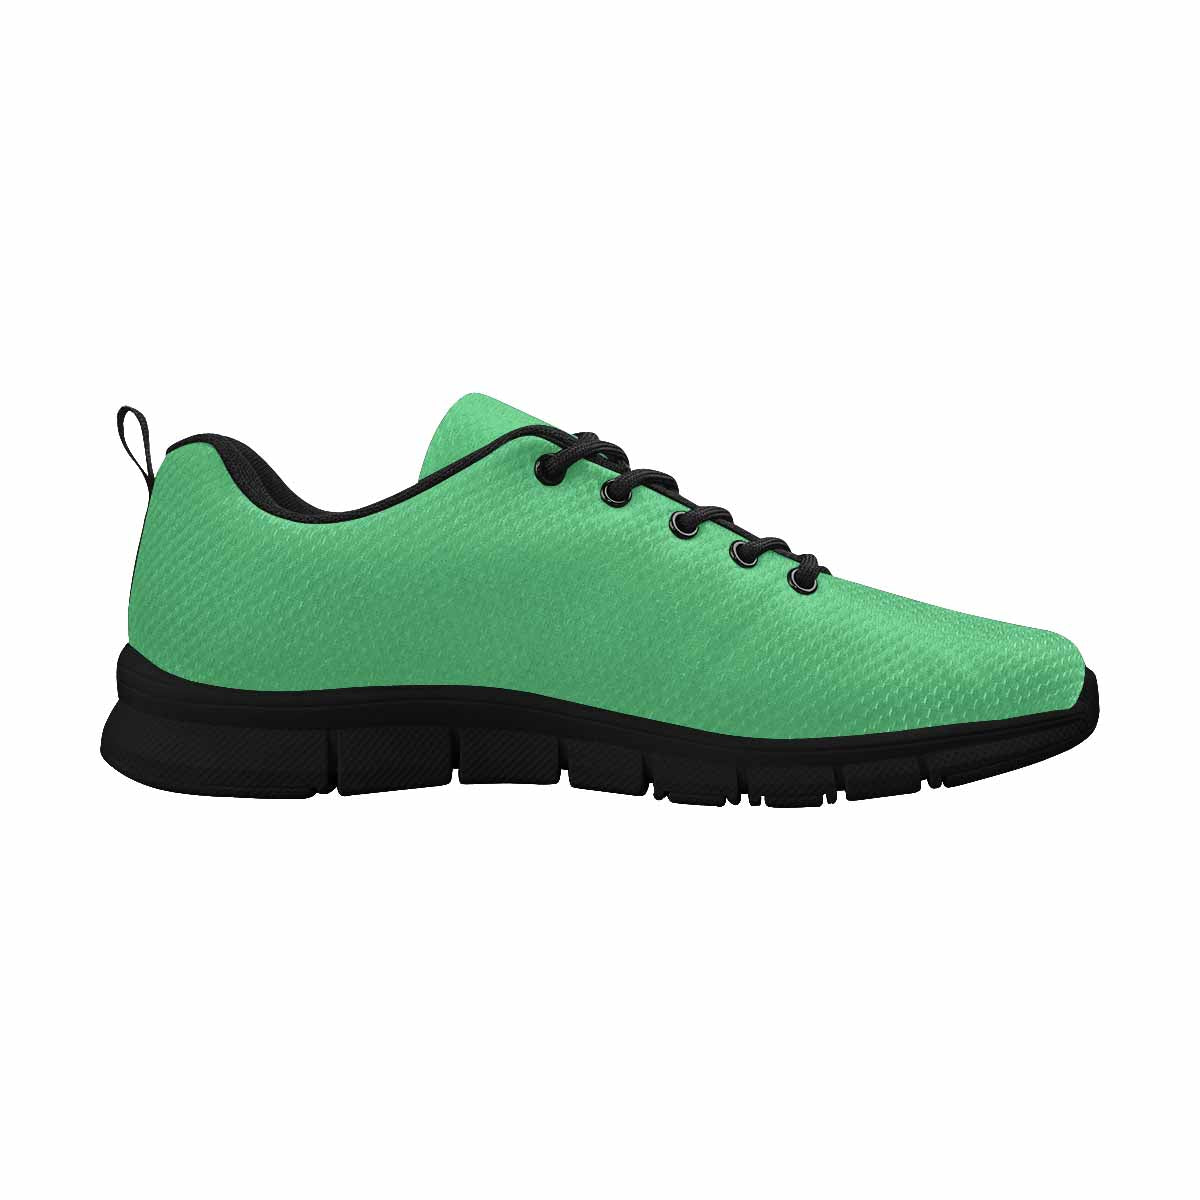 Sneakers For Men, Emerald Green Running Shoes